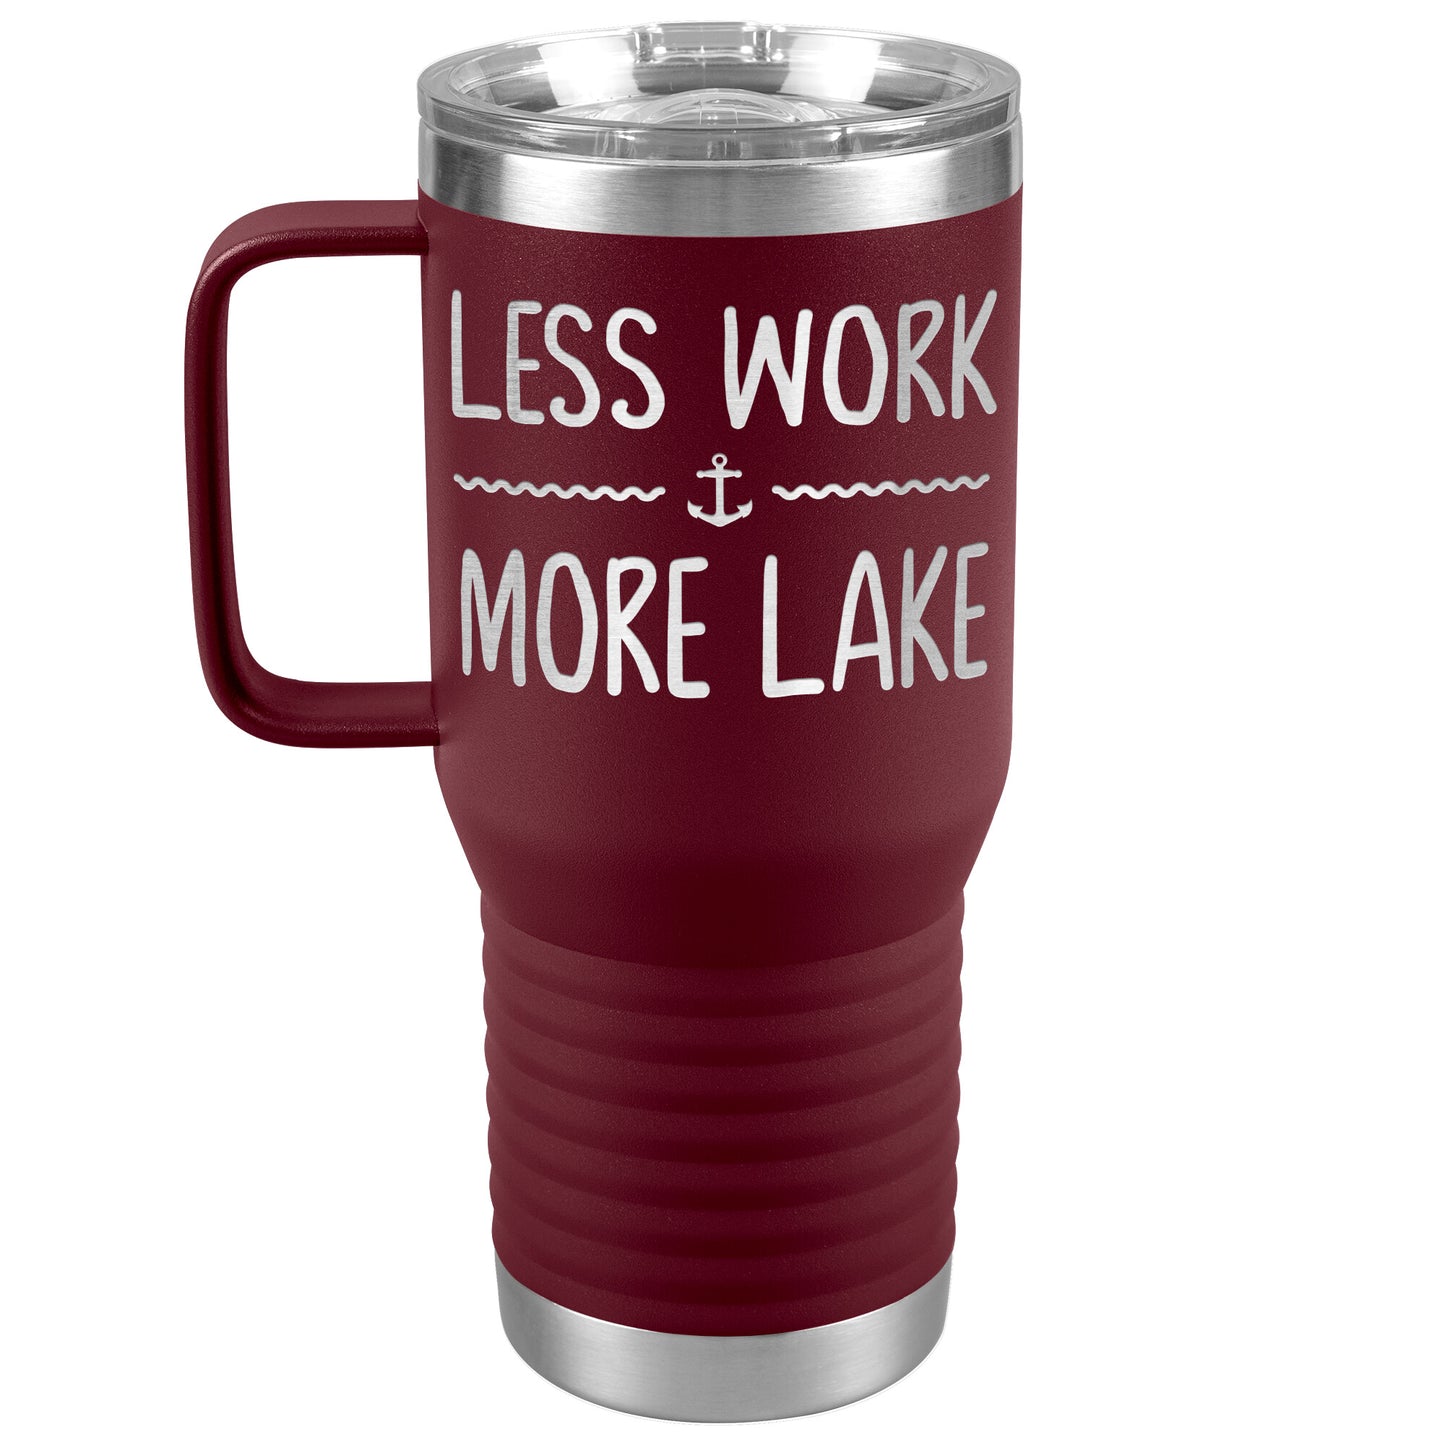 Less Work More Lake Drink Tumbler - Funny Insulated Cup